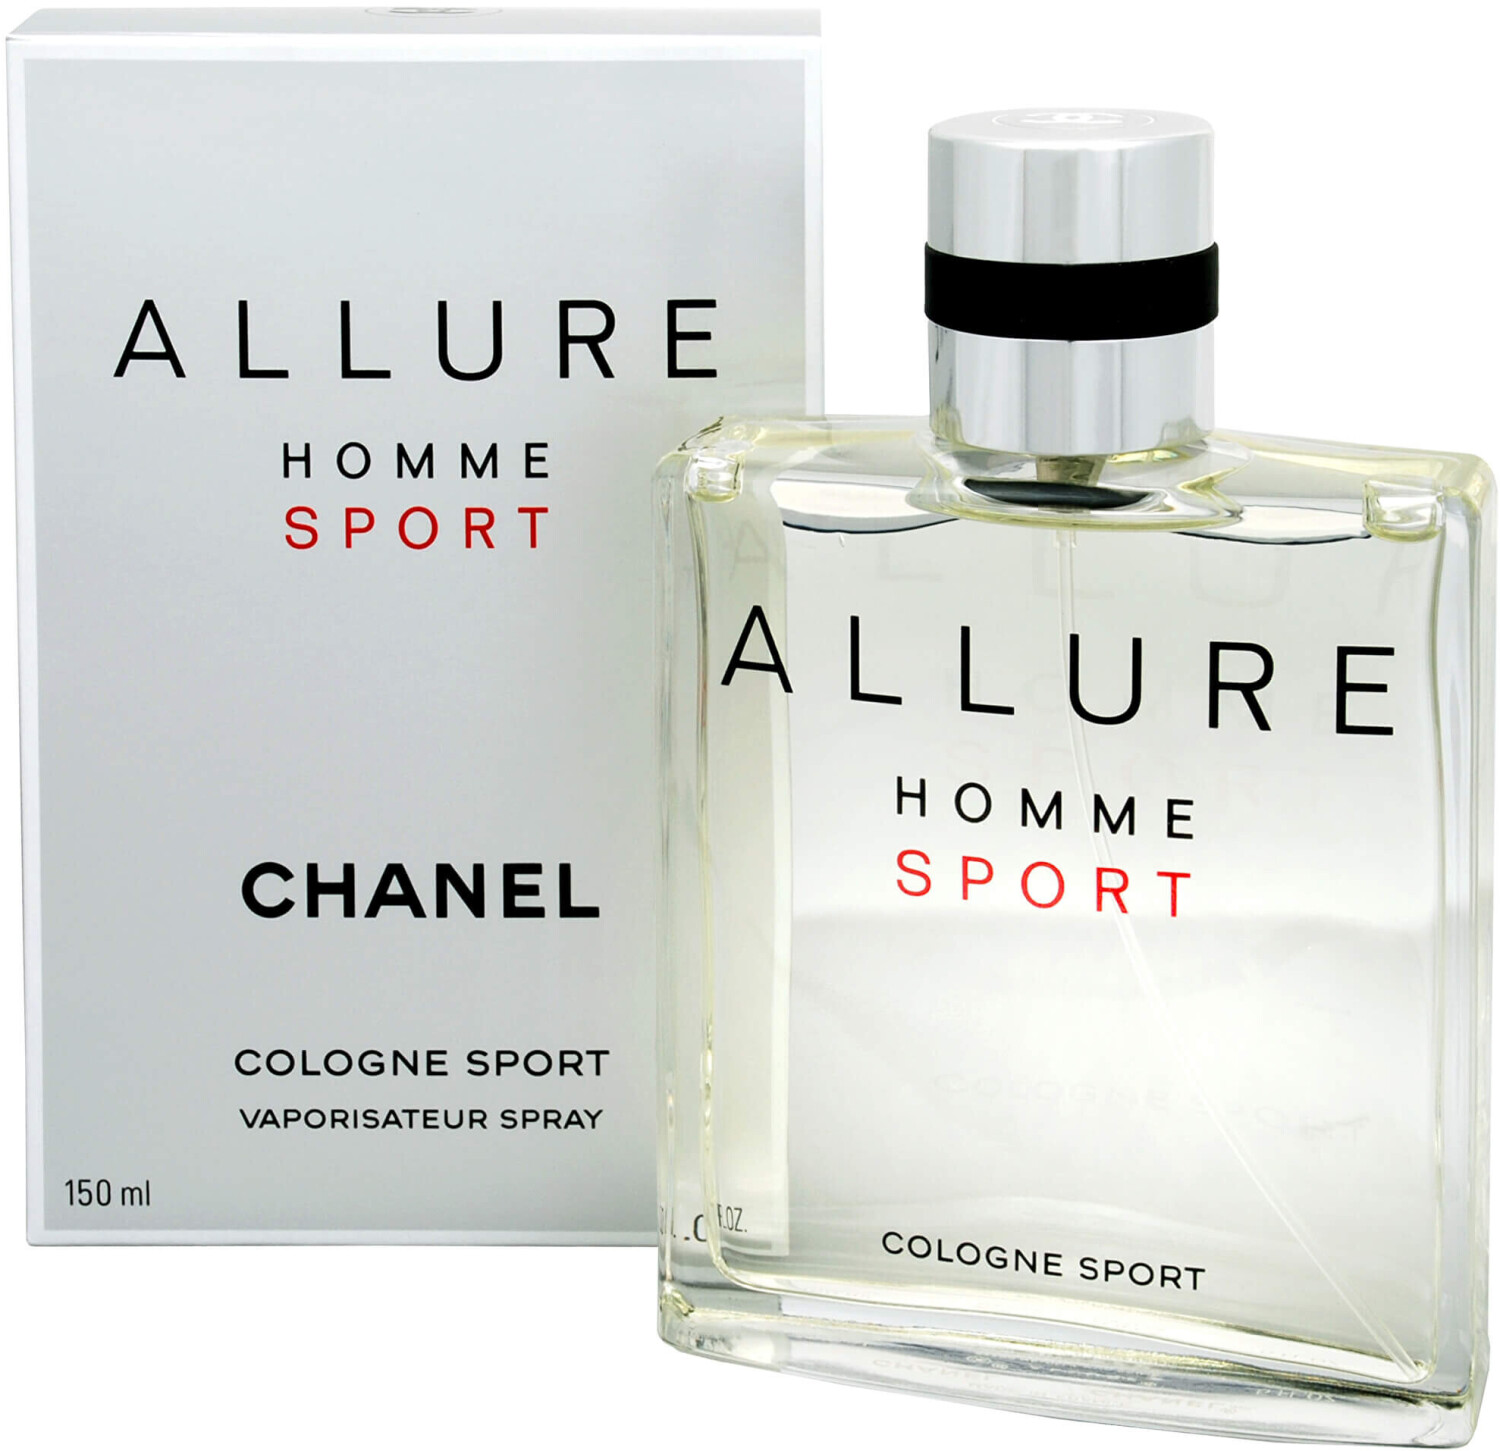 Chanel Allure Homme Sport Cologne (150 ml) desde 93,95 € | Compara